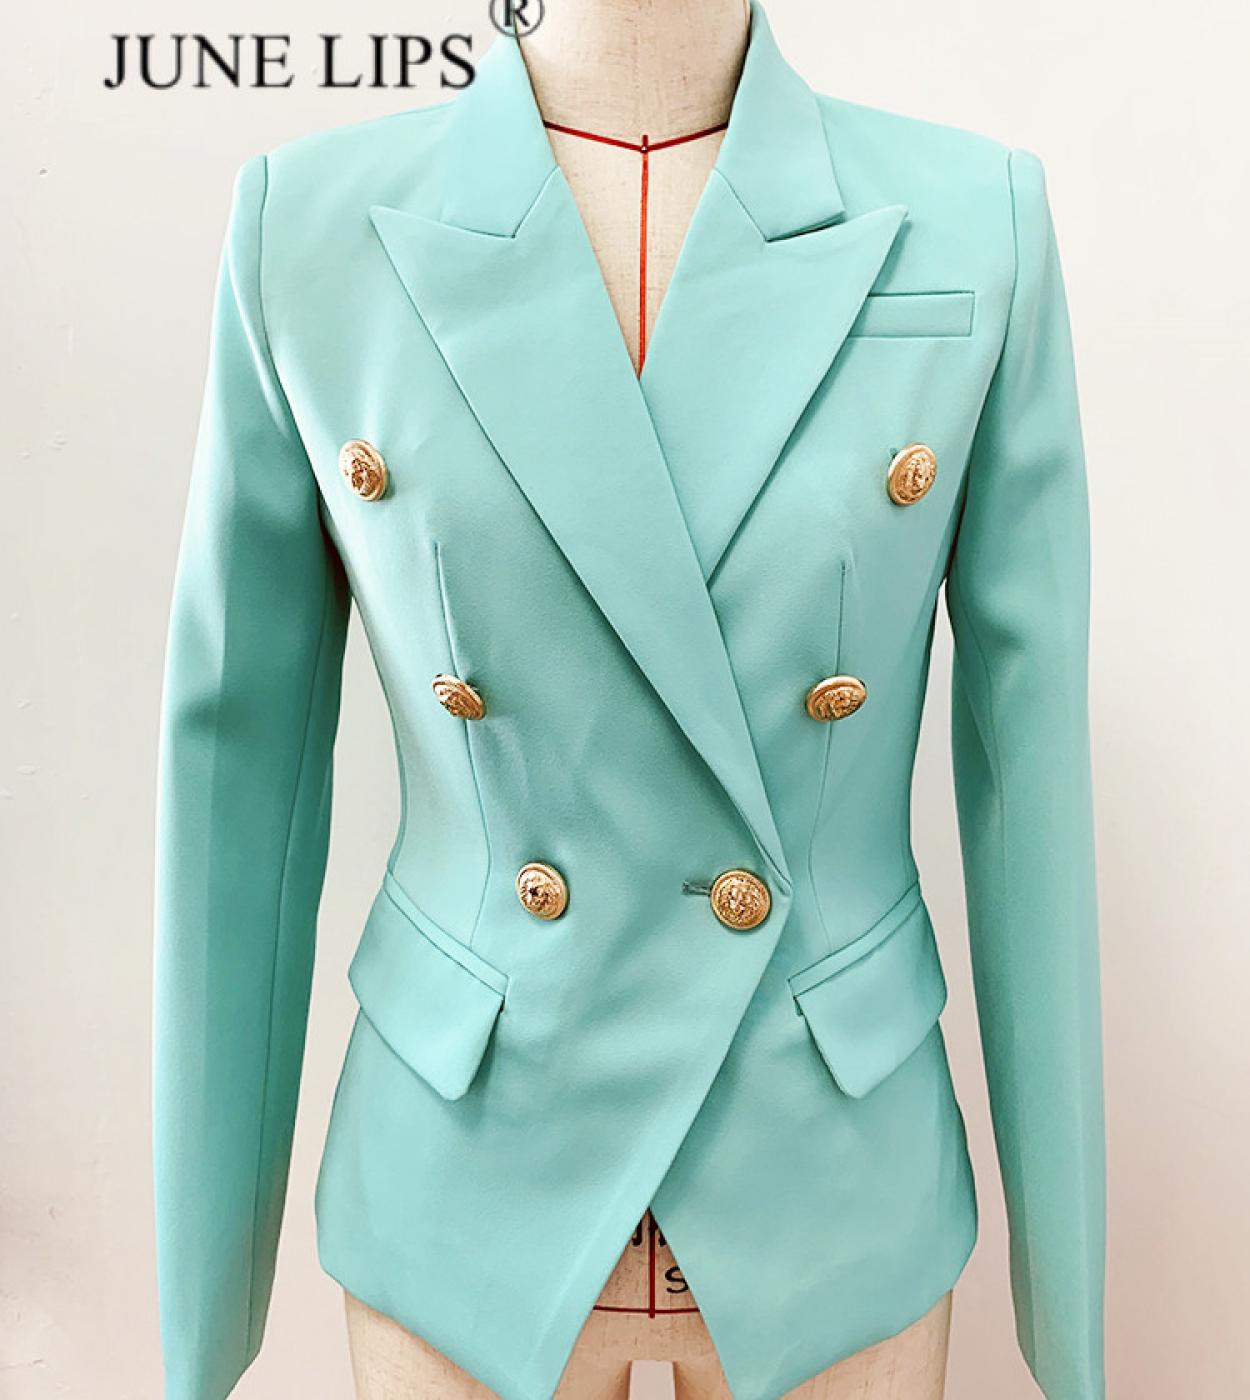 June Lips 2022 Fashion Designer Jacket Womens Classic Metal Lion Buttons Double Breasted Slim Fitting Blazer Mint